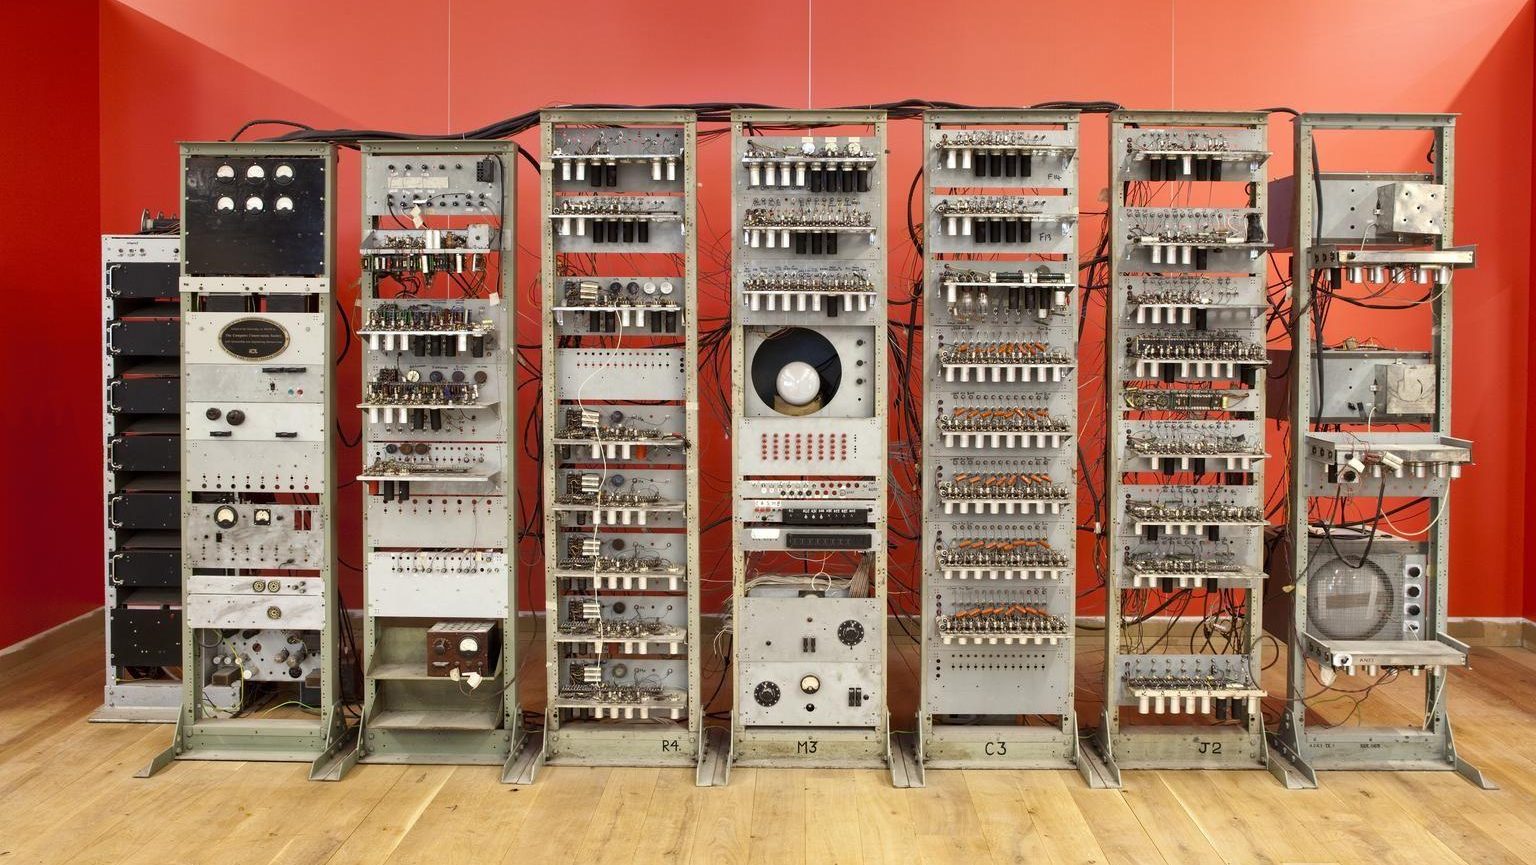 A vintage computer mainframe with multiple interconnected units, cables, and knobs, displayed in front of a red background on a wooden floor.